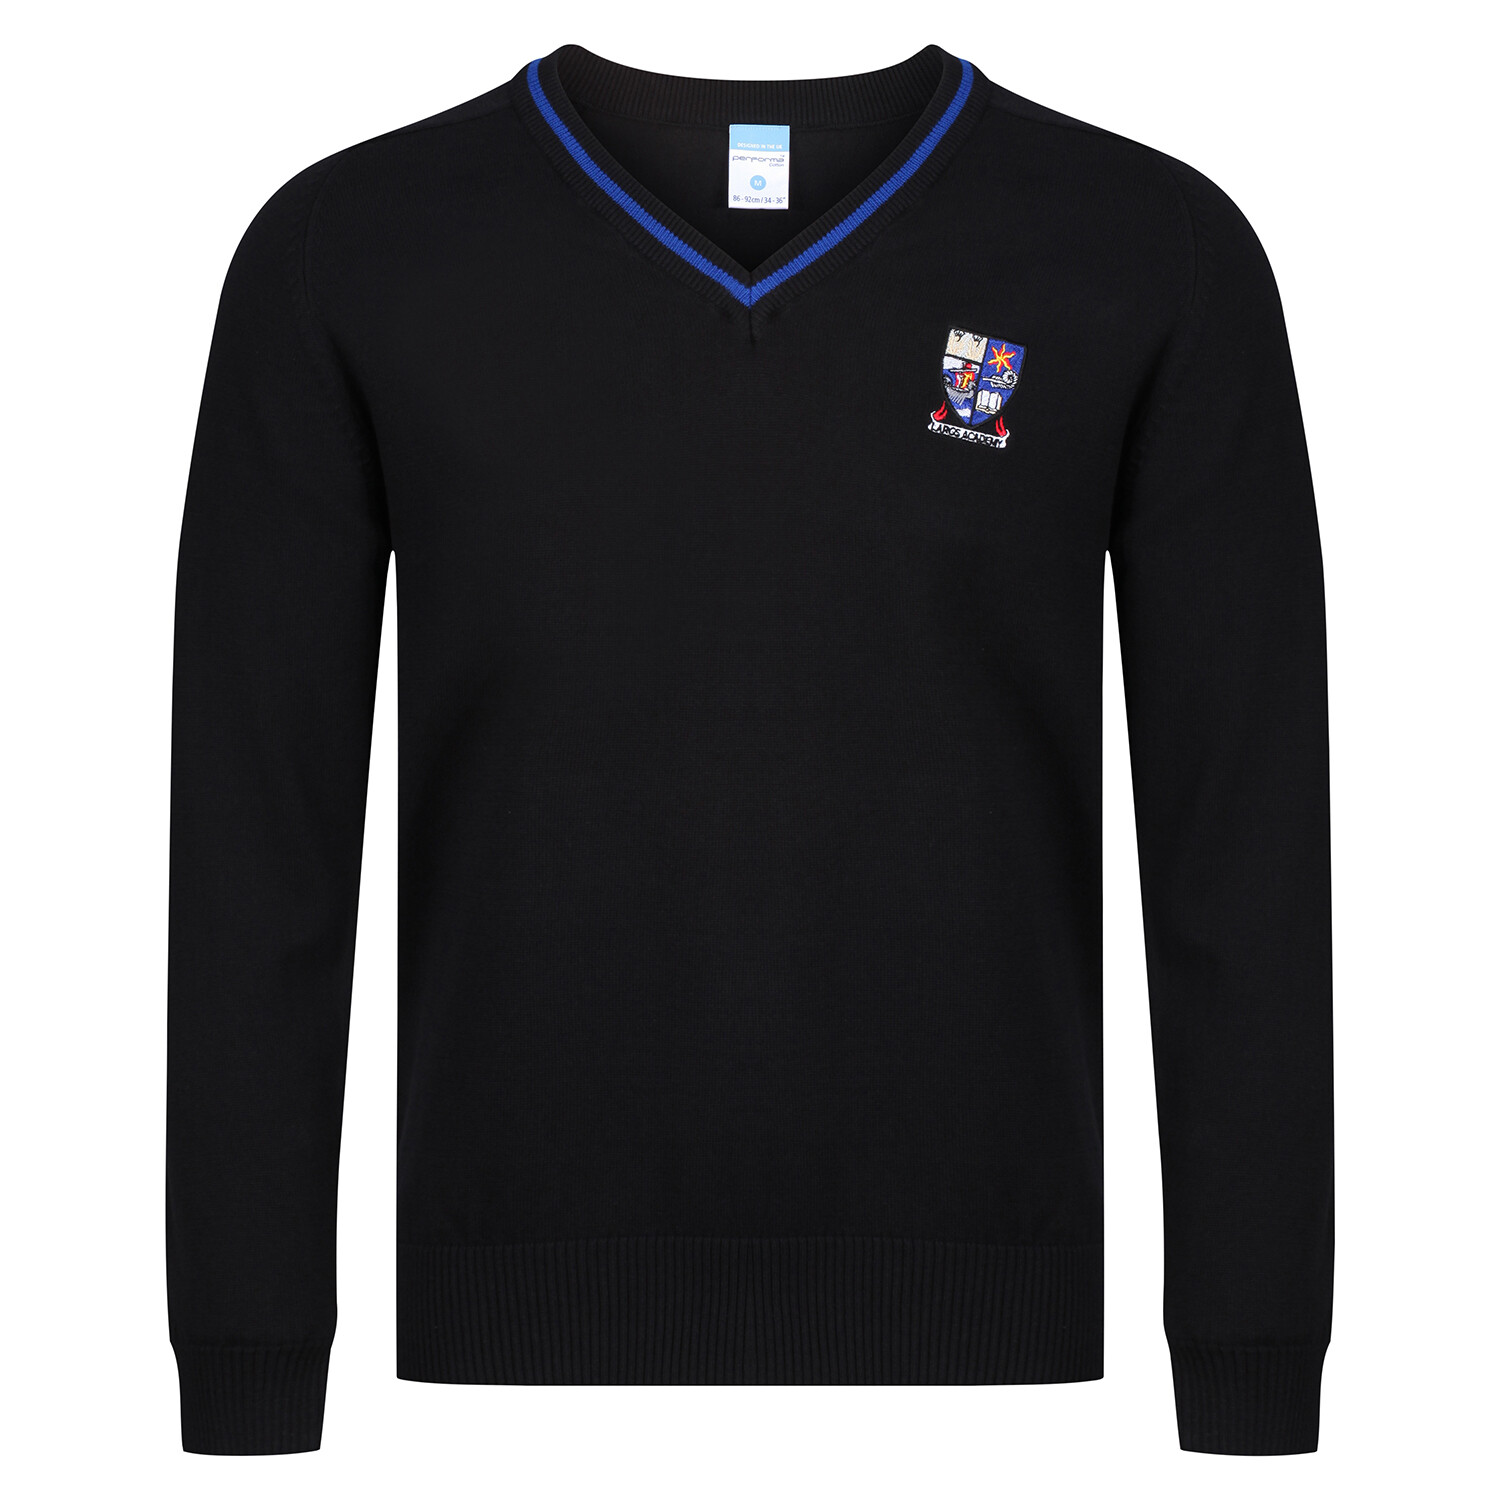 Largs Academy Knitted V-neck with stripe